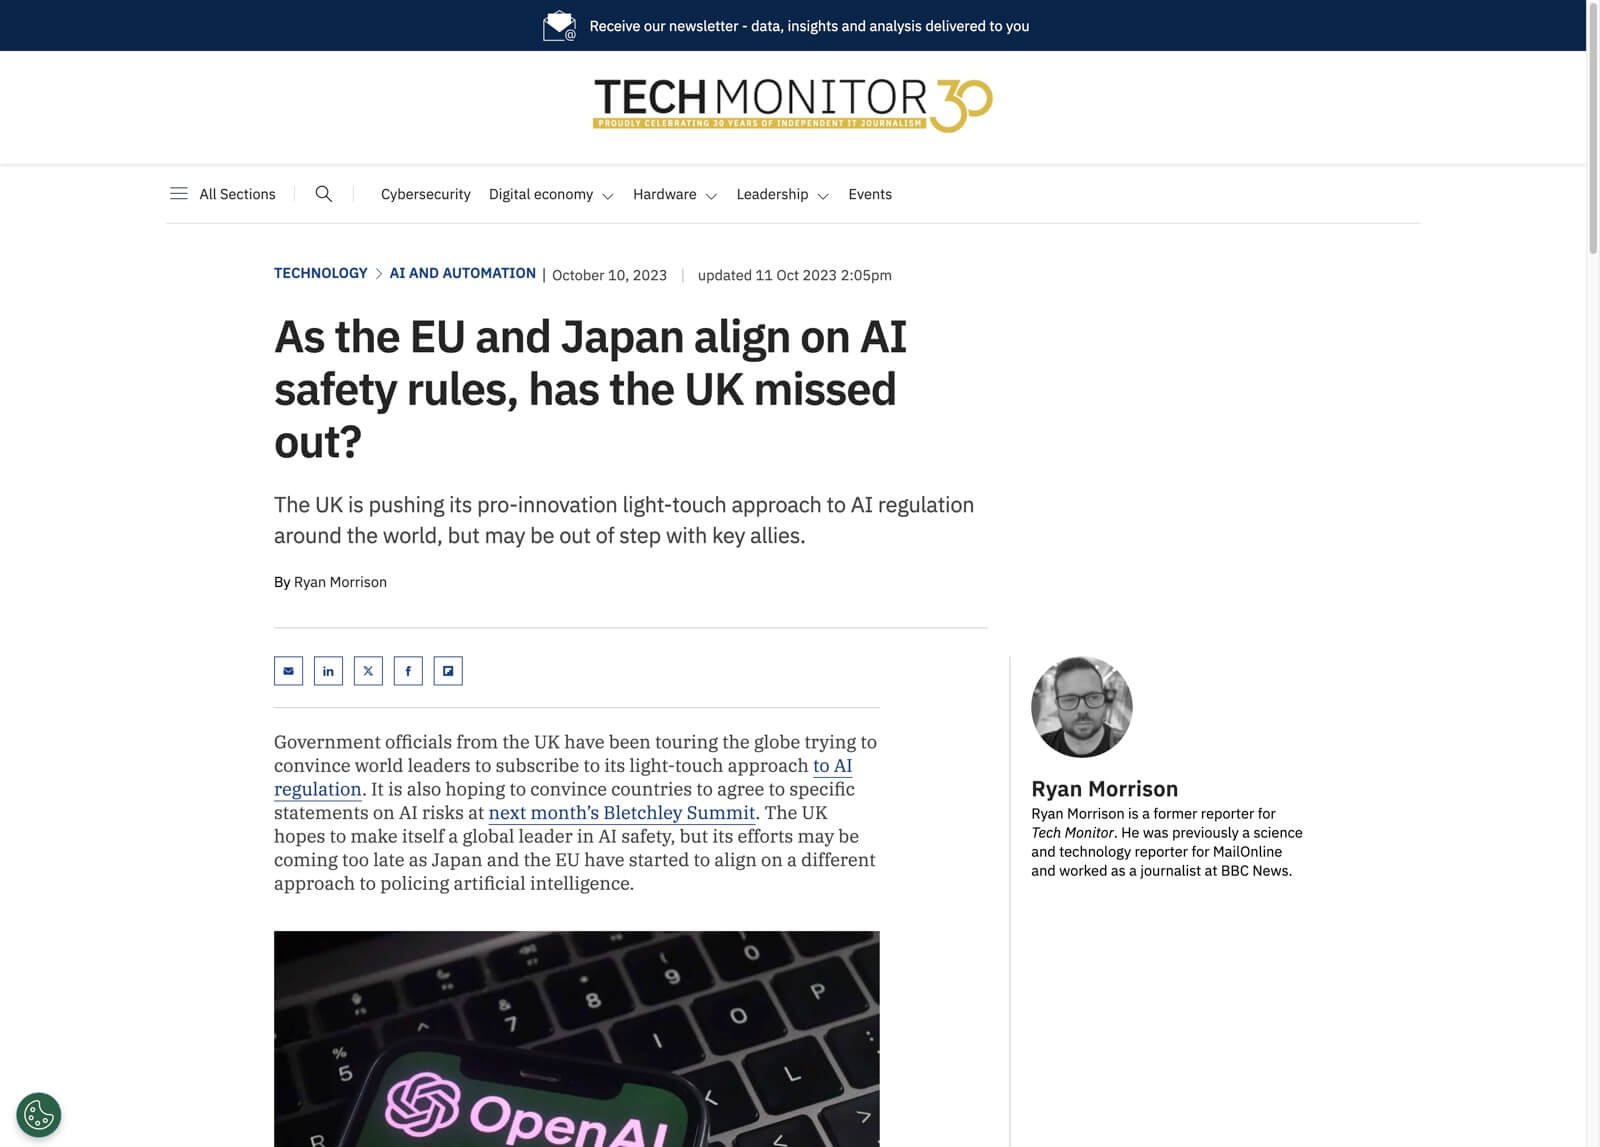 Tech-Monitor-As-EU-and-Japan-align-on-AI-safety-has-the-UK-missed-the-boat-.jpg